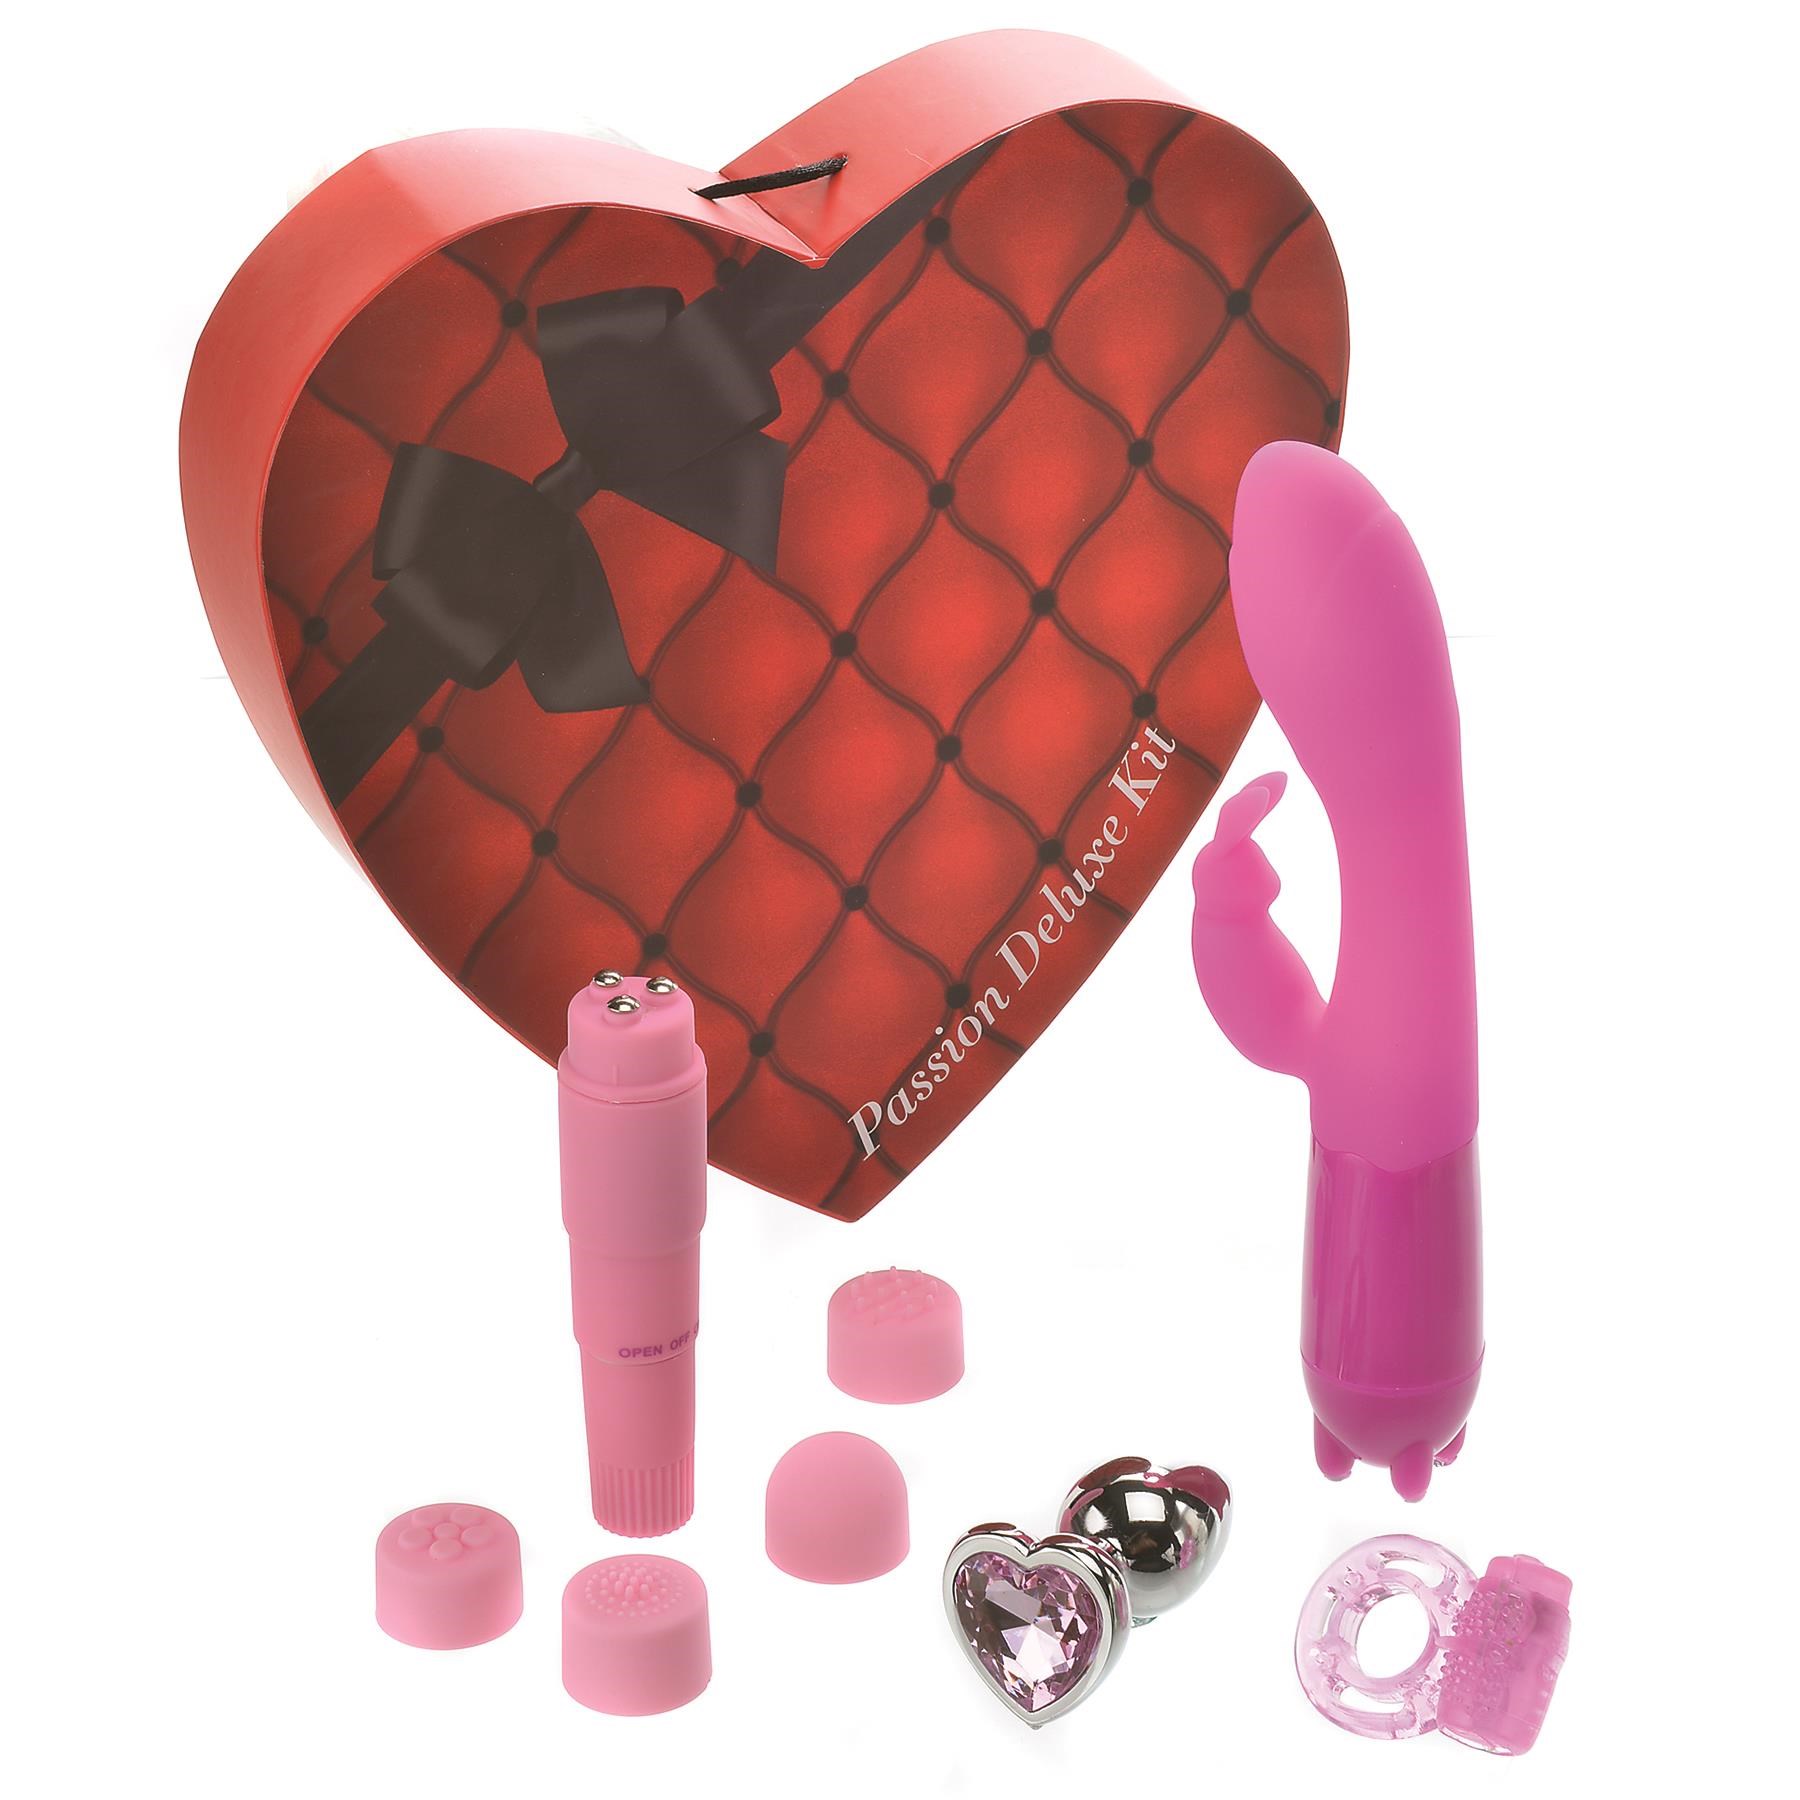 Passion Deluxe Gift Set - All Components with Package Shot